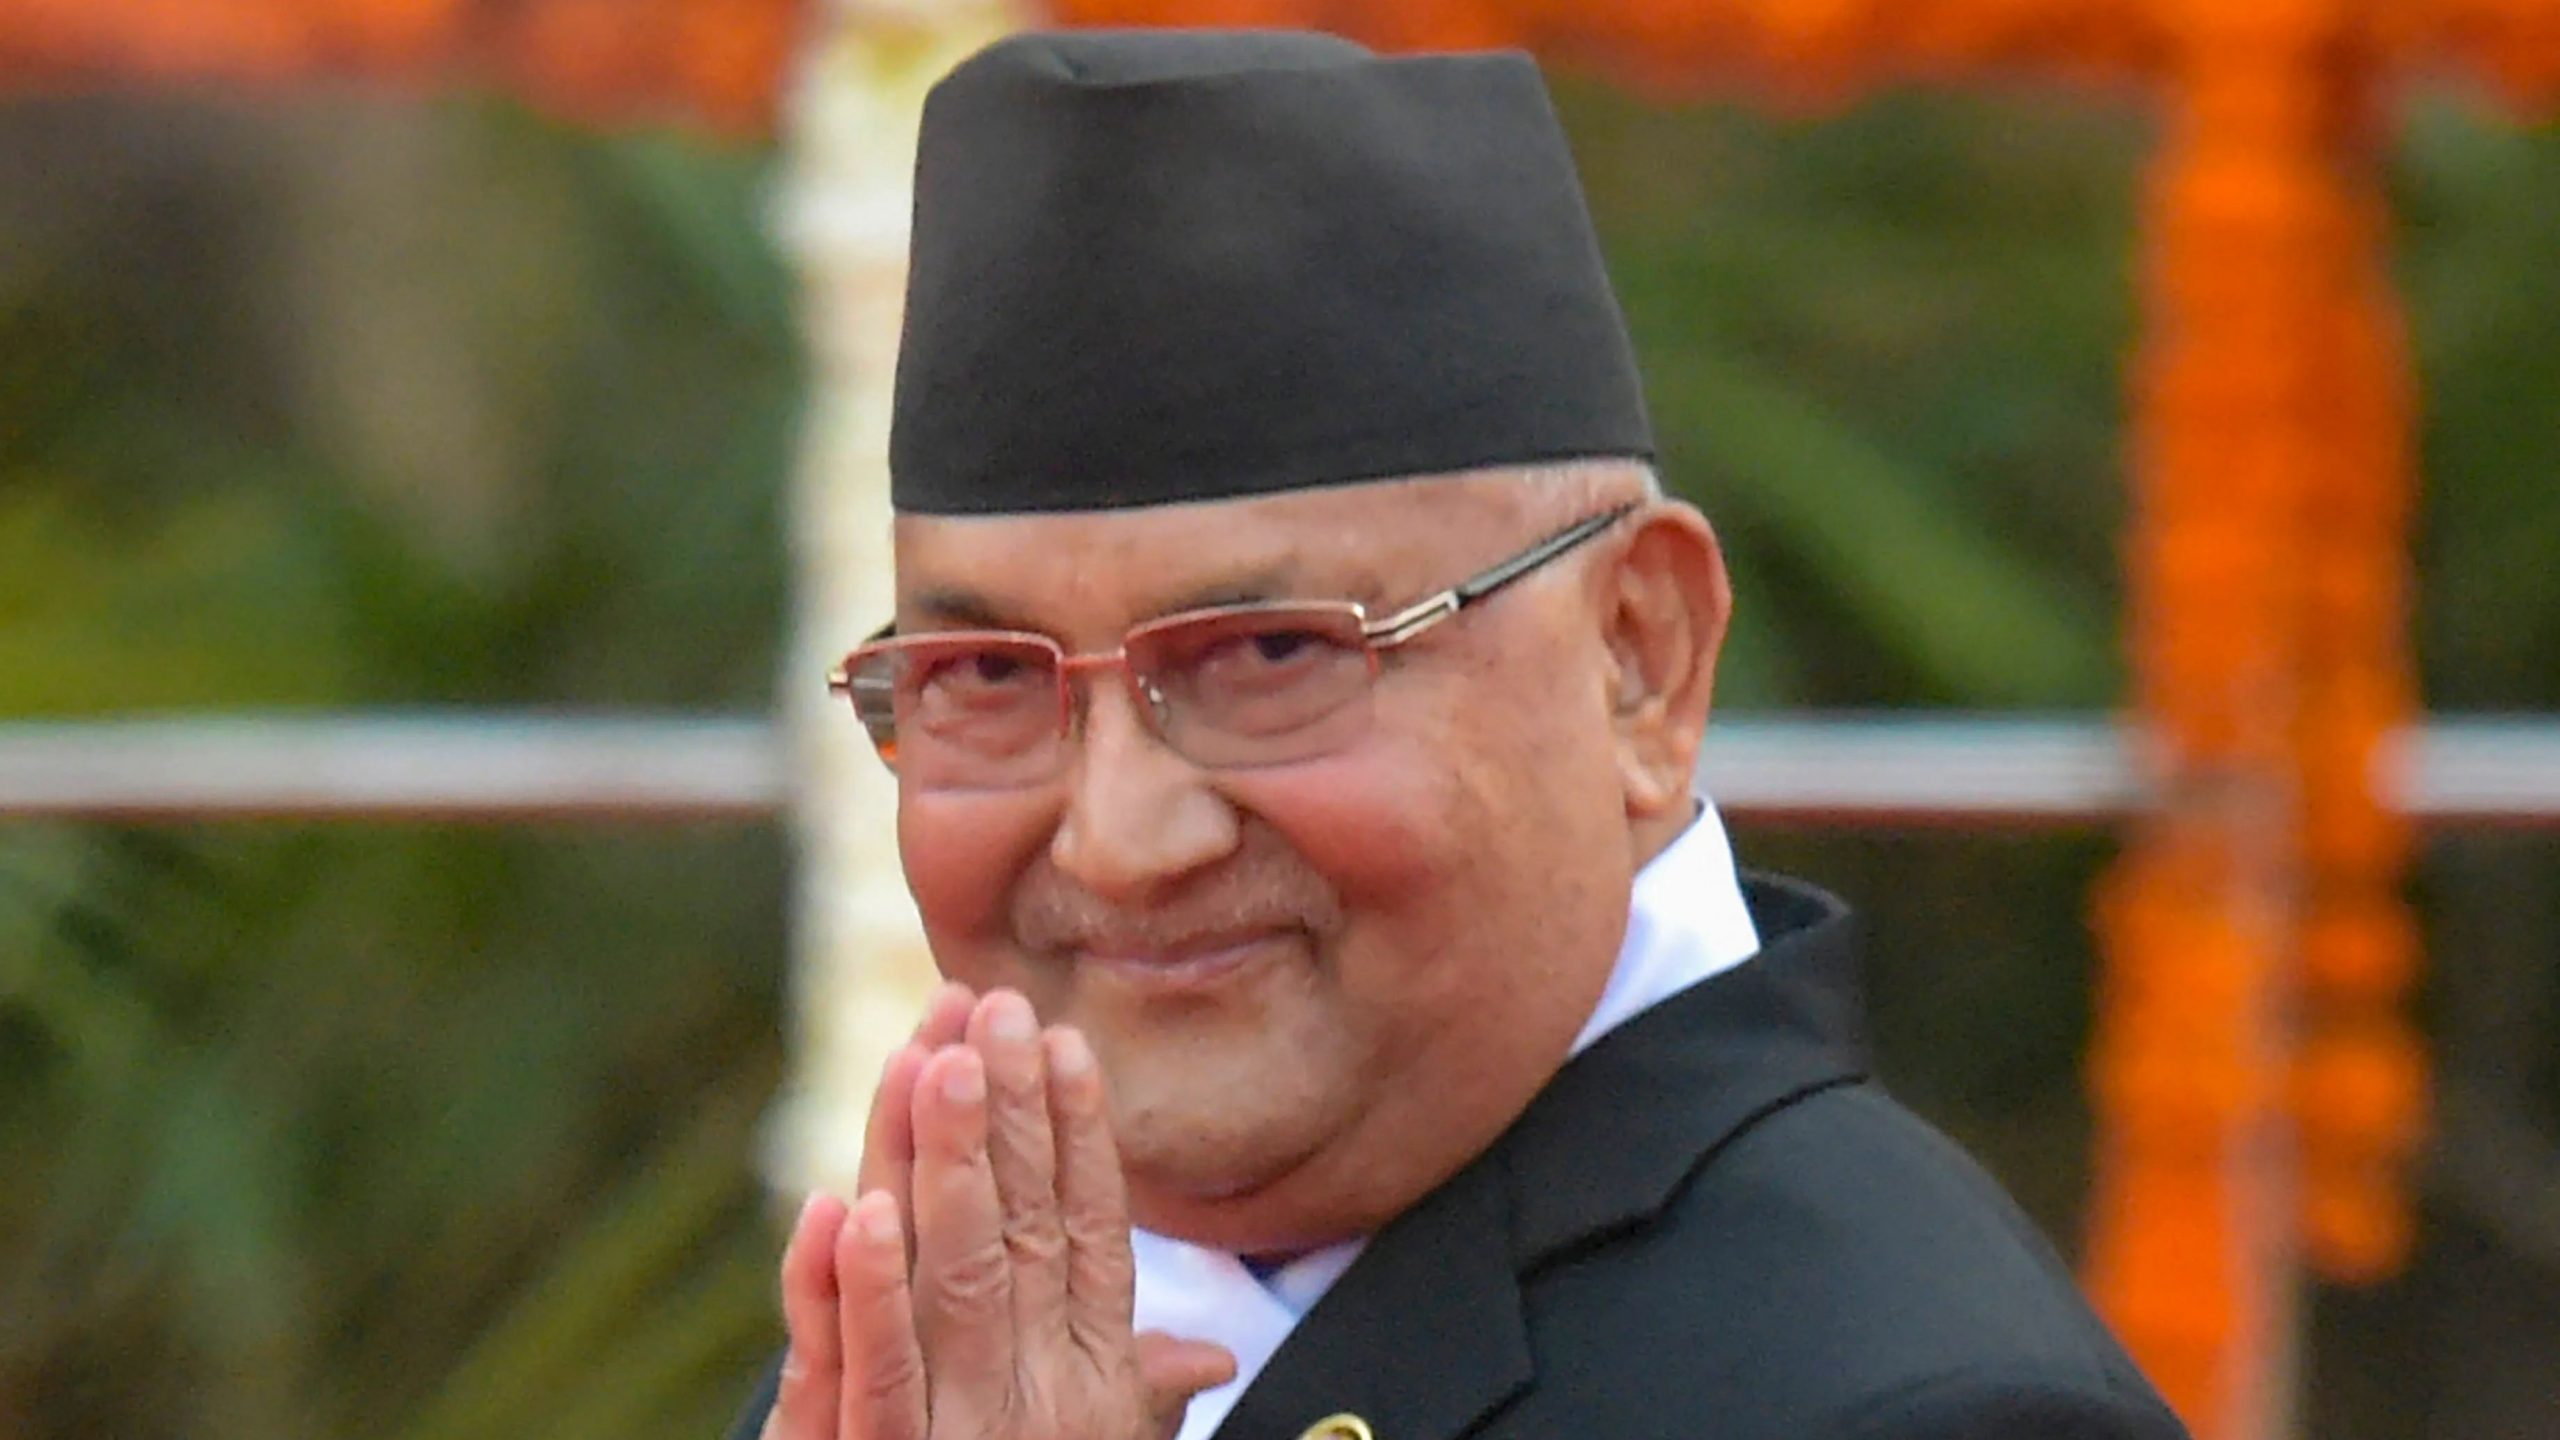 Nepal signs peace deal with banned Maoist rebels